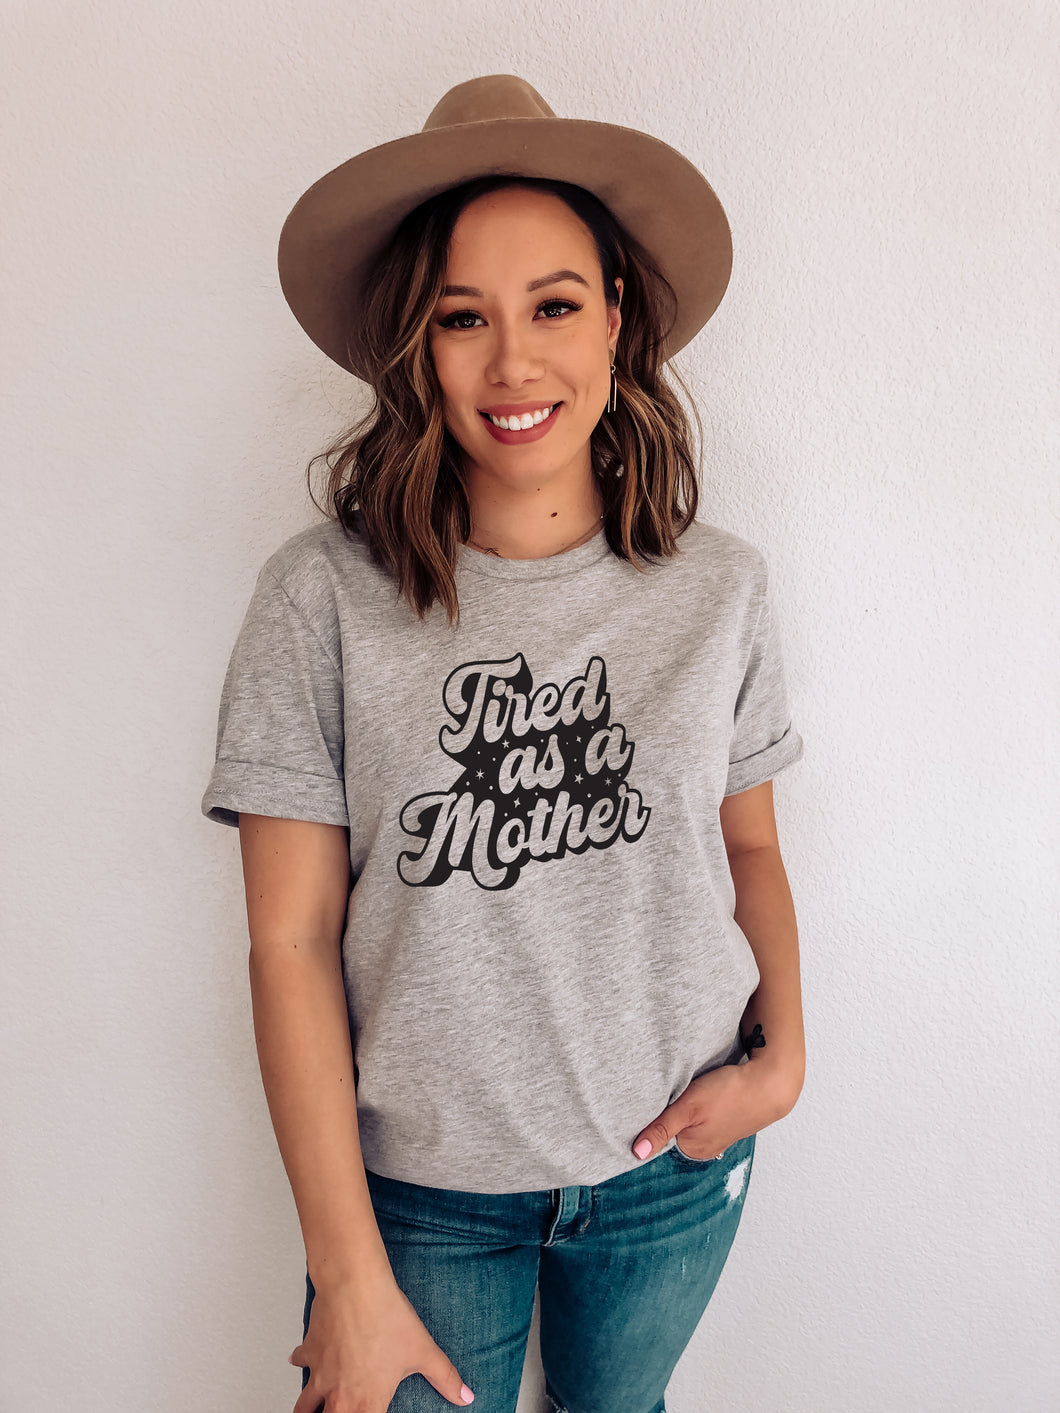 tired as a mother retro shirt